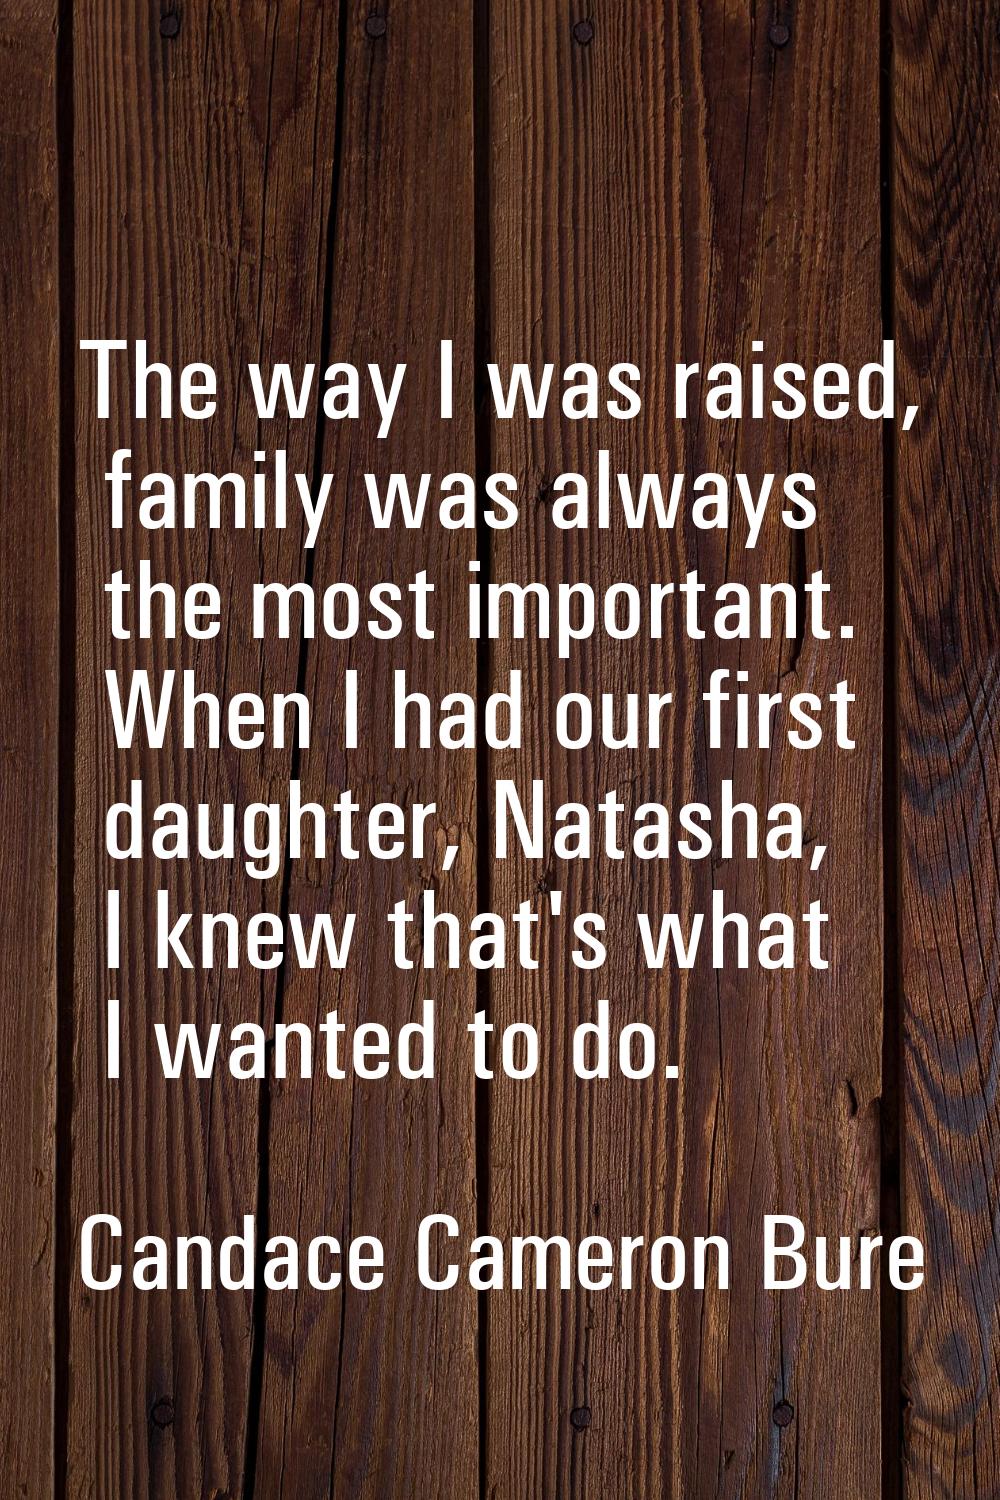 The way I was raised, family was always the most important. When I had our first daughter, Natasha,